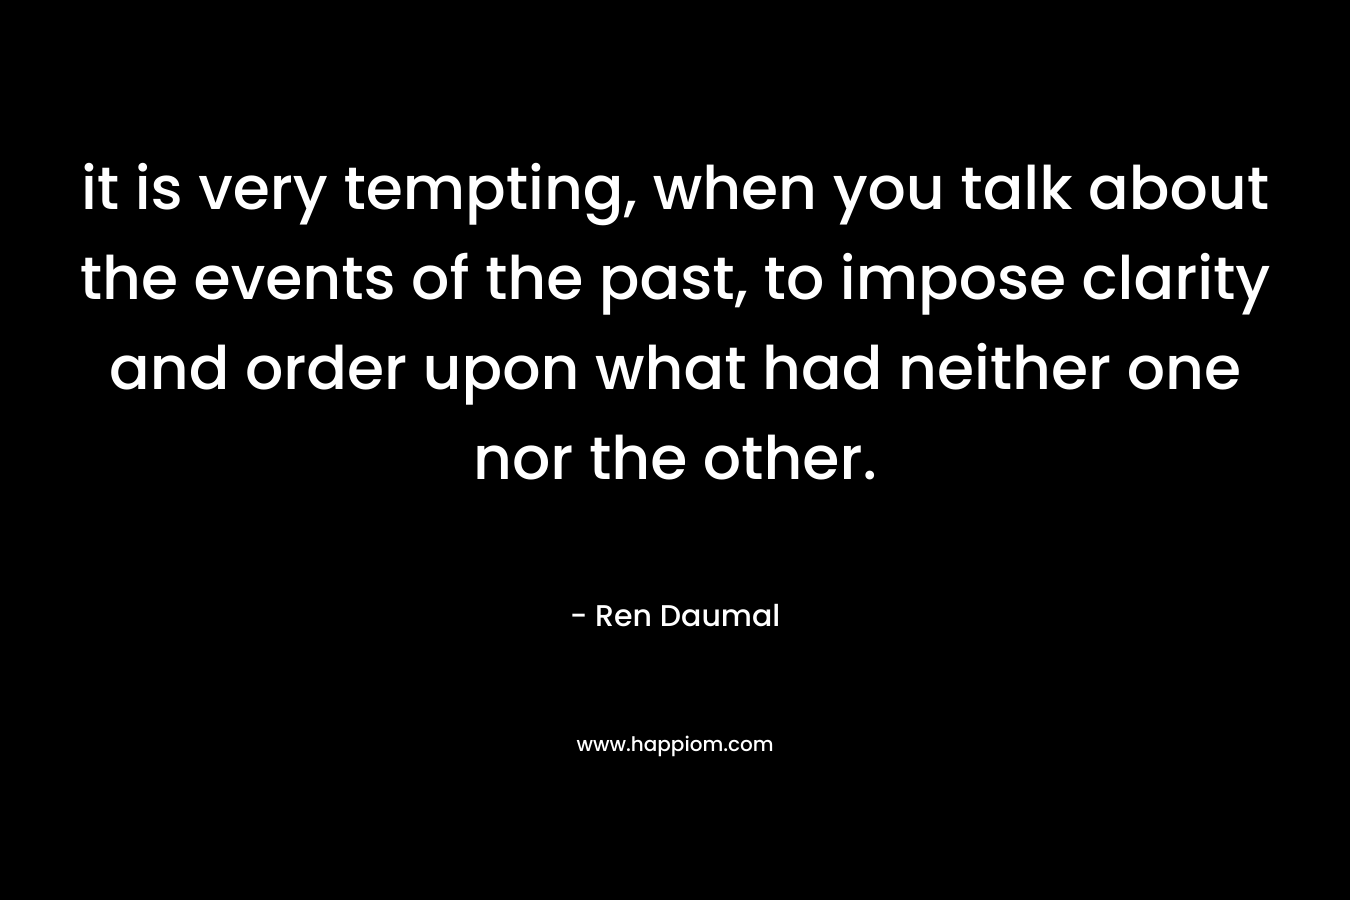 it is very tempting, when you talk about the events of the past, to impose clarity and order upon what had neither one nor the other. – Ren Daumal